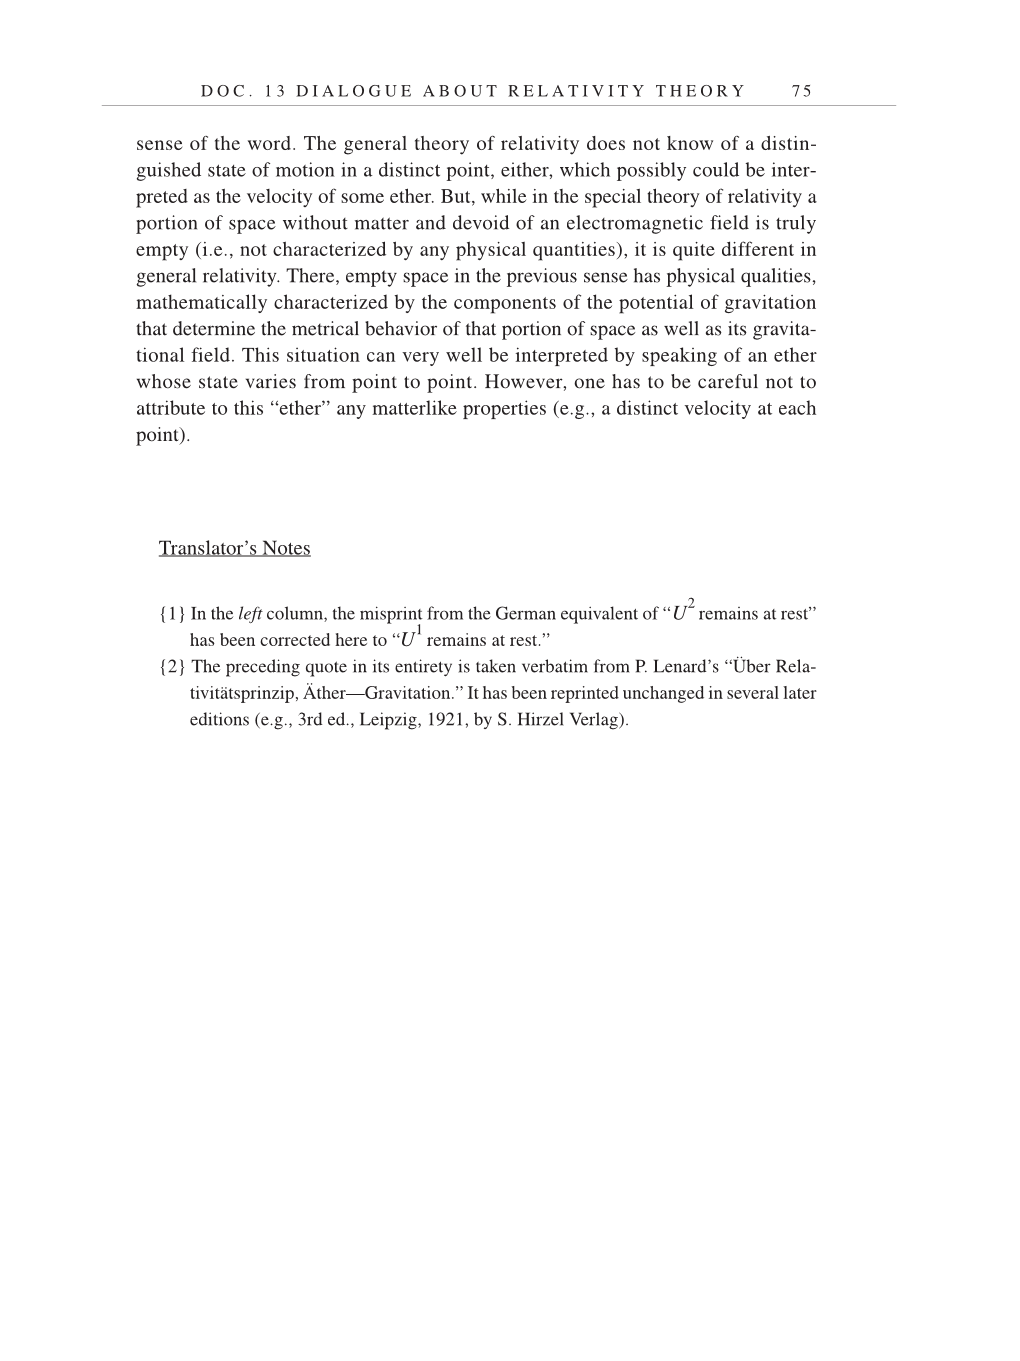 Volume 7: The Berlin Years: Writings, 1918-1921 (English translation supplement) page 75